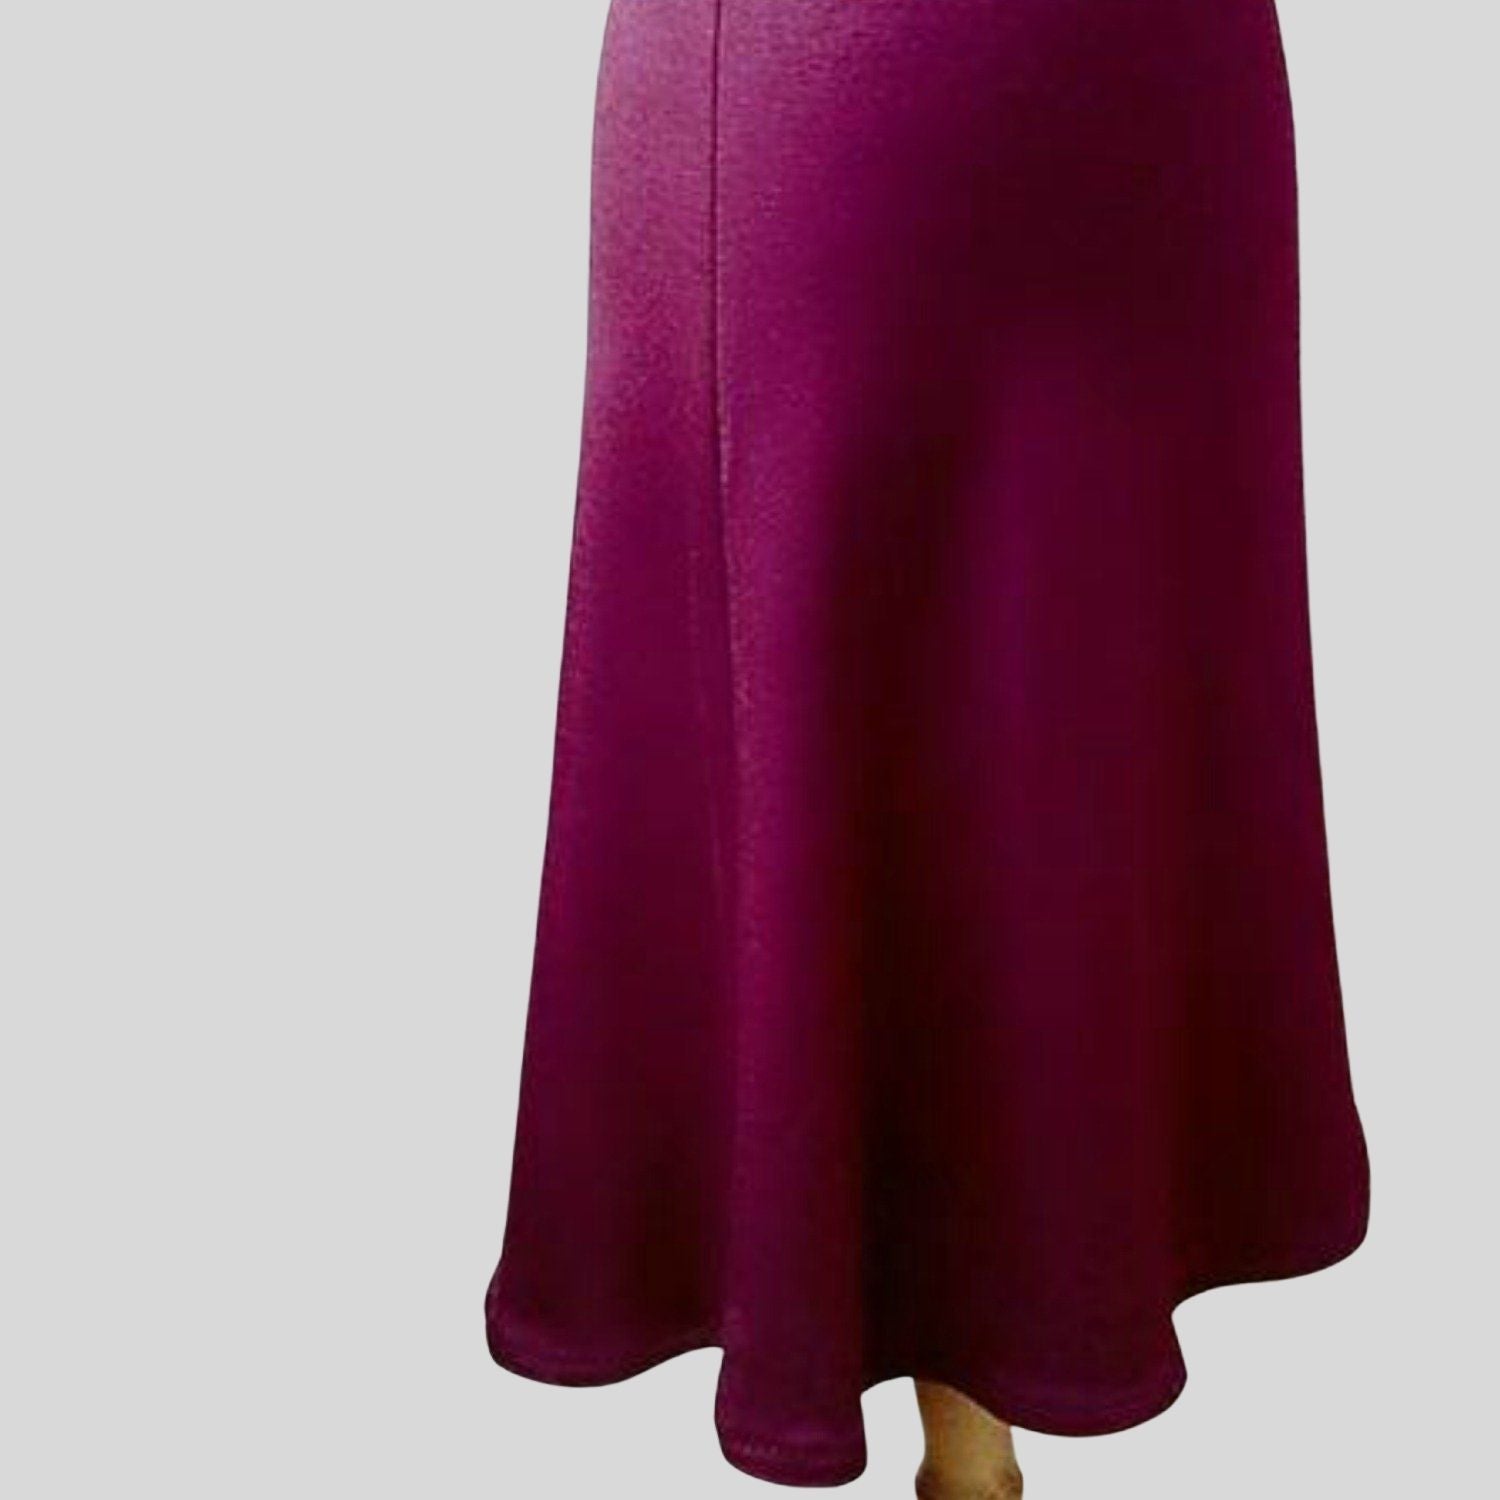 Buy godet skirt Canada | Organic cotton summer skirts made in Canada 